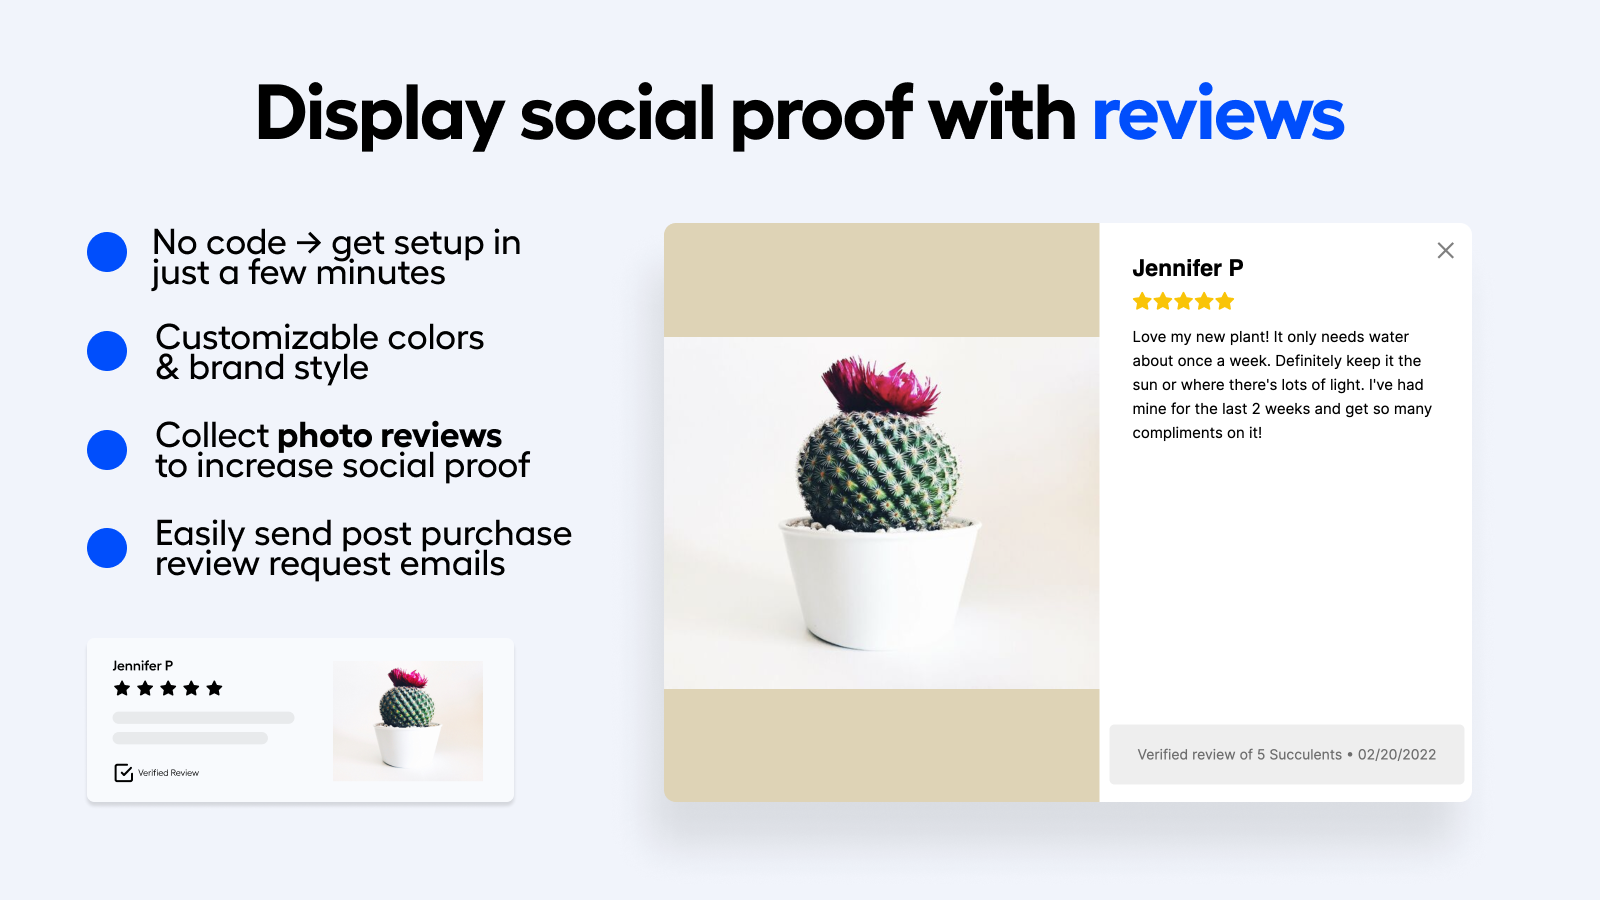 Display social proof with reviews